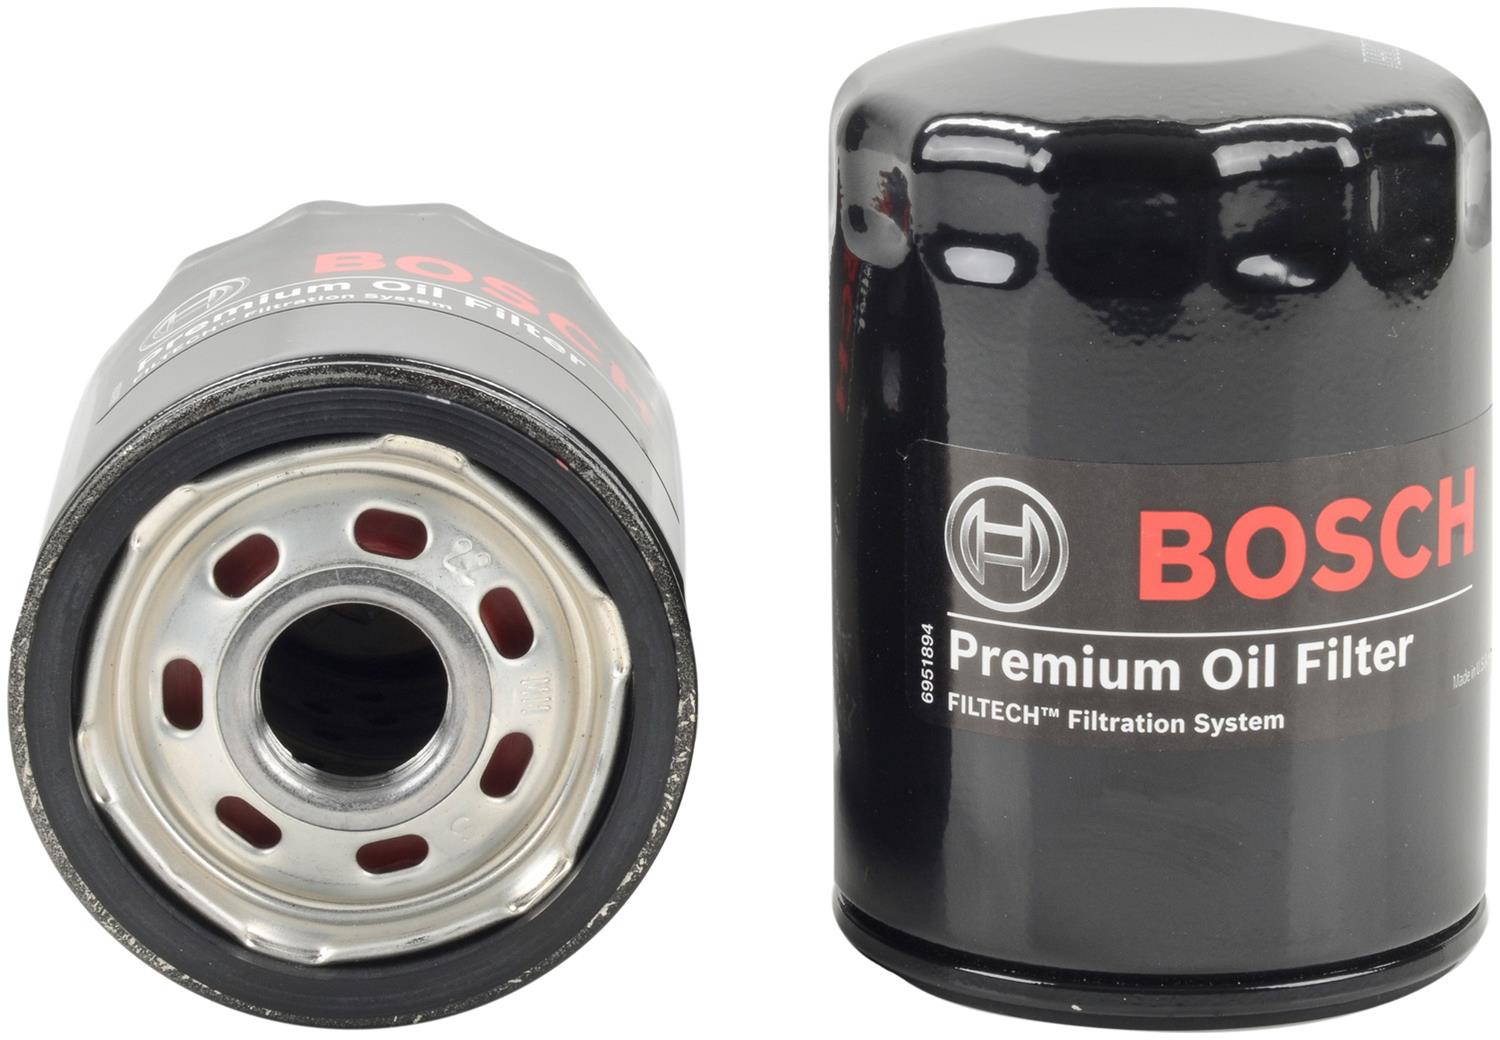 BOSCH 3502 Premium Oil Filter With FILTECH Filtration Technology -  Compatible With Select Buick, Cadillac, Chevrolet, Dodge, Ford, GMC, Jeep,  Lincoln